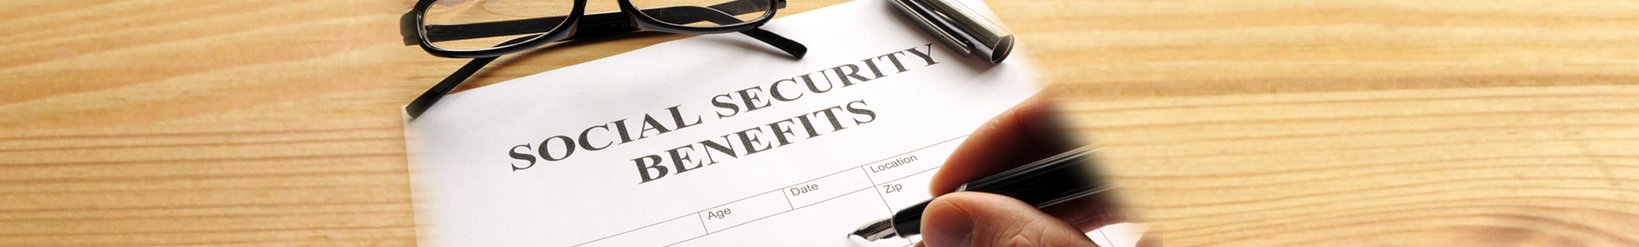 Social Security Disability Benefits for Anxiety, Phobias, Panic Attacks, Obsessive Compulsive Disorder (OCD), or Post-Traumatic Stress Disorder (PTSD) (Page 1)